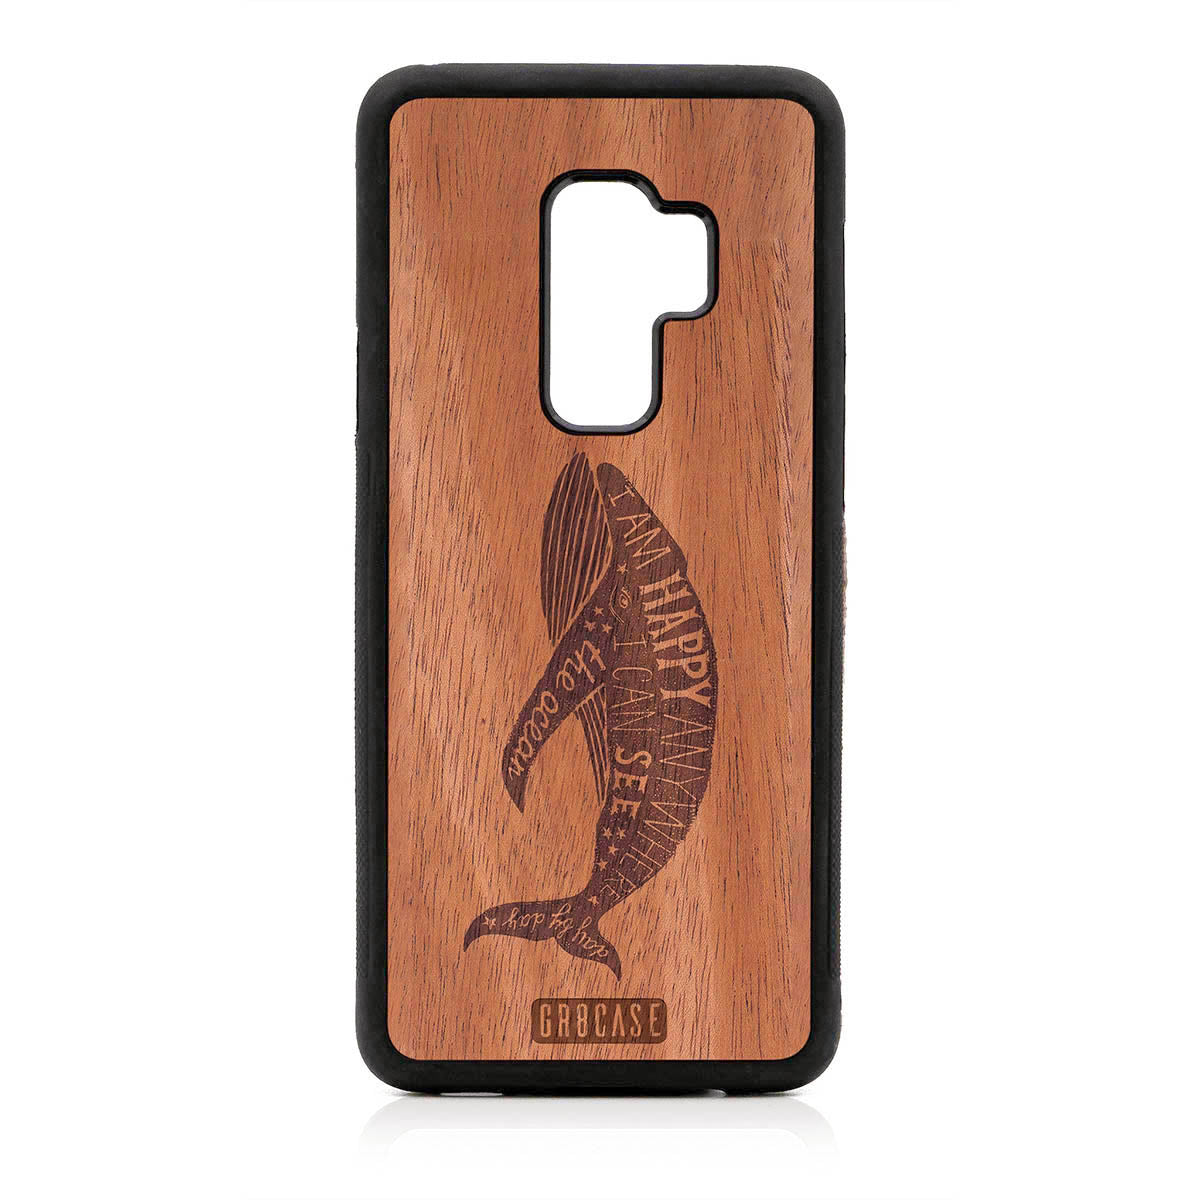 I'm Happy Anywhere I Can See The Ocean (Whale) Design Wood Case For Samsung Galaxy S9 Plus